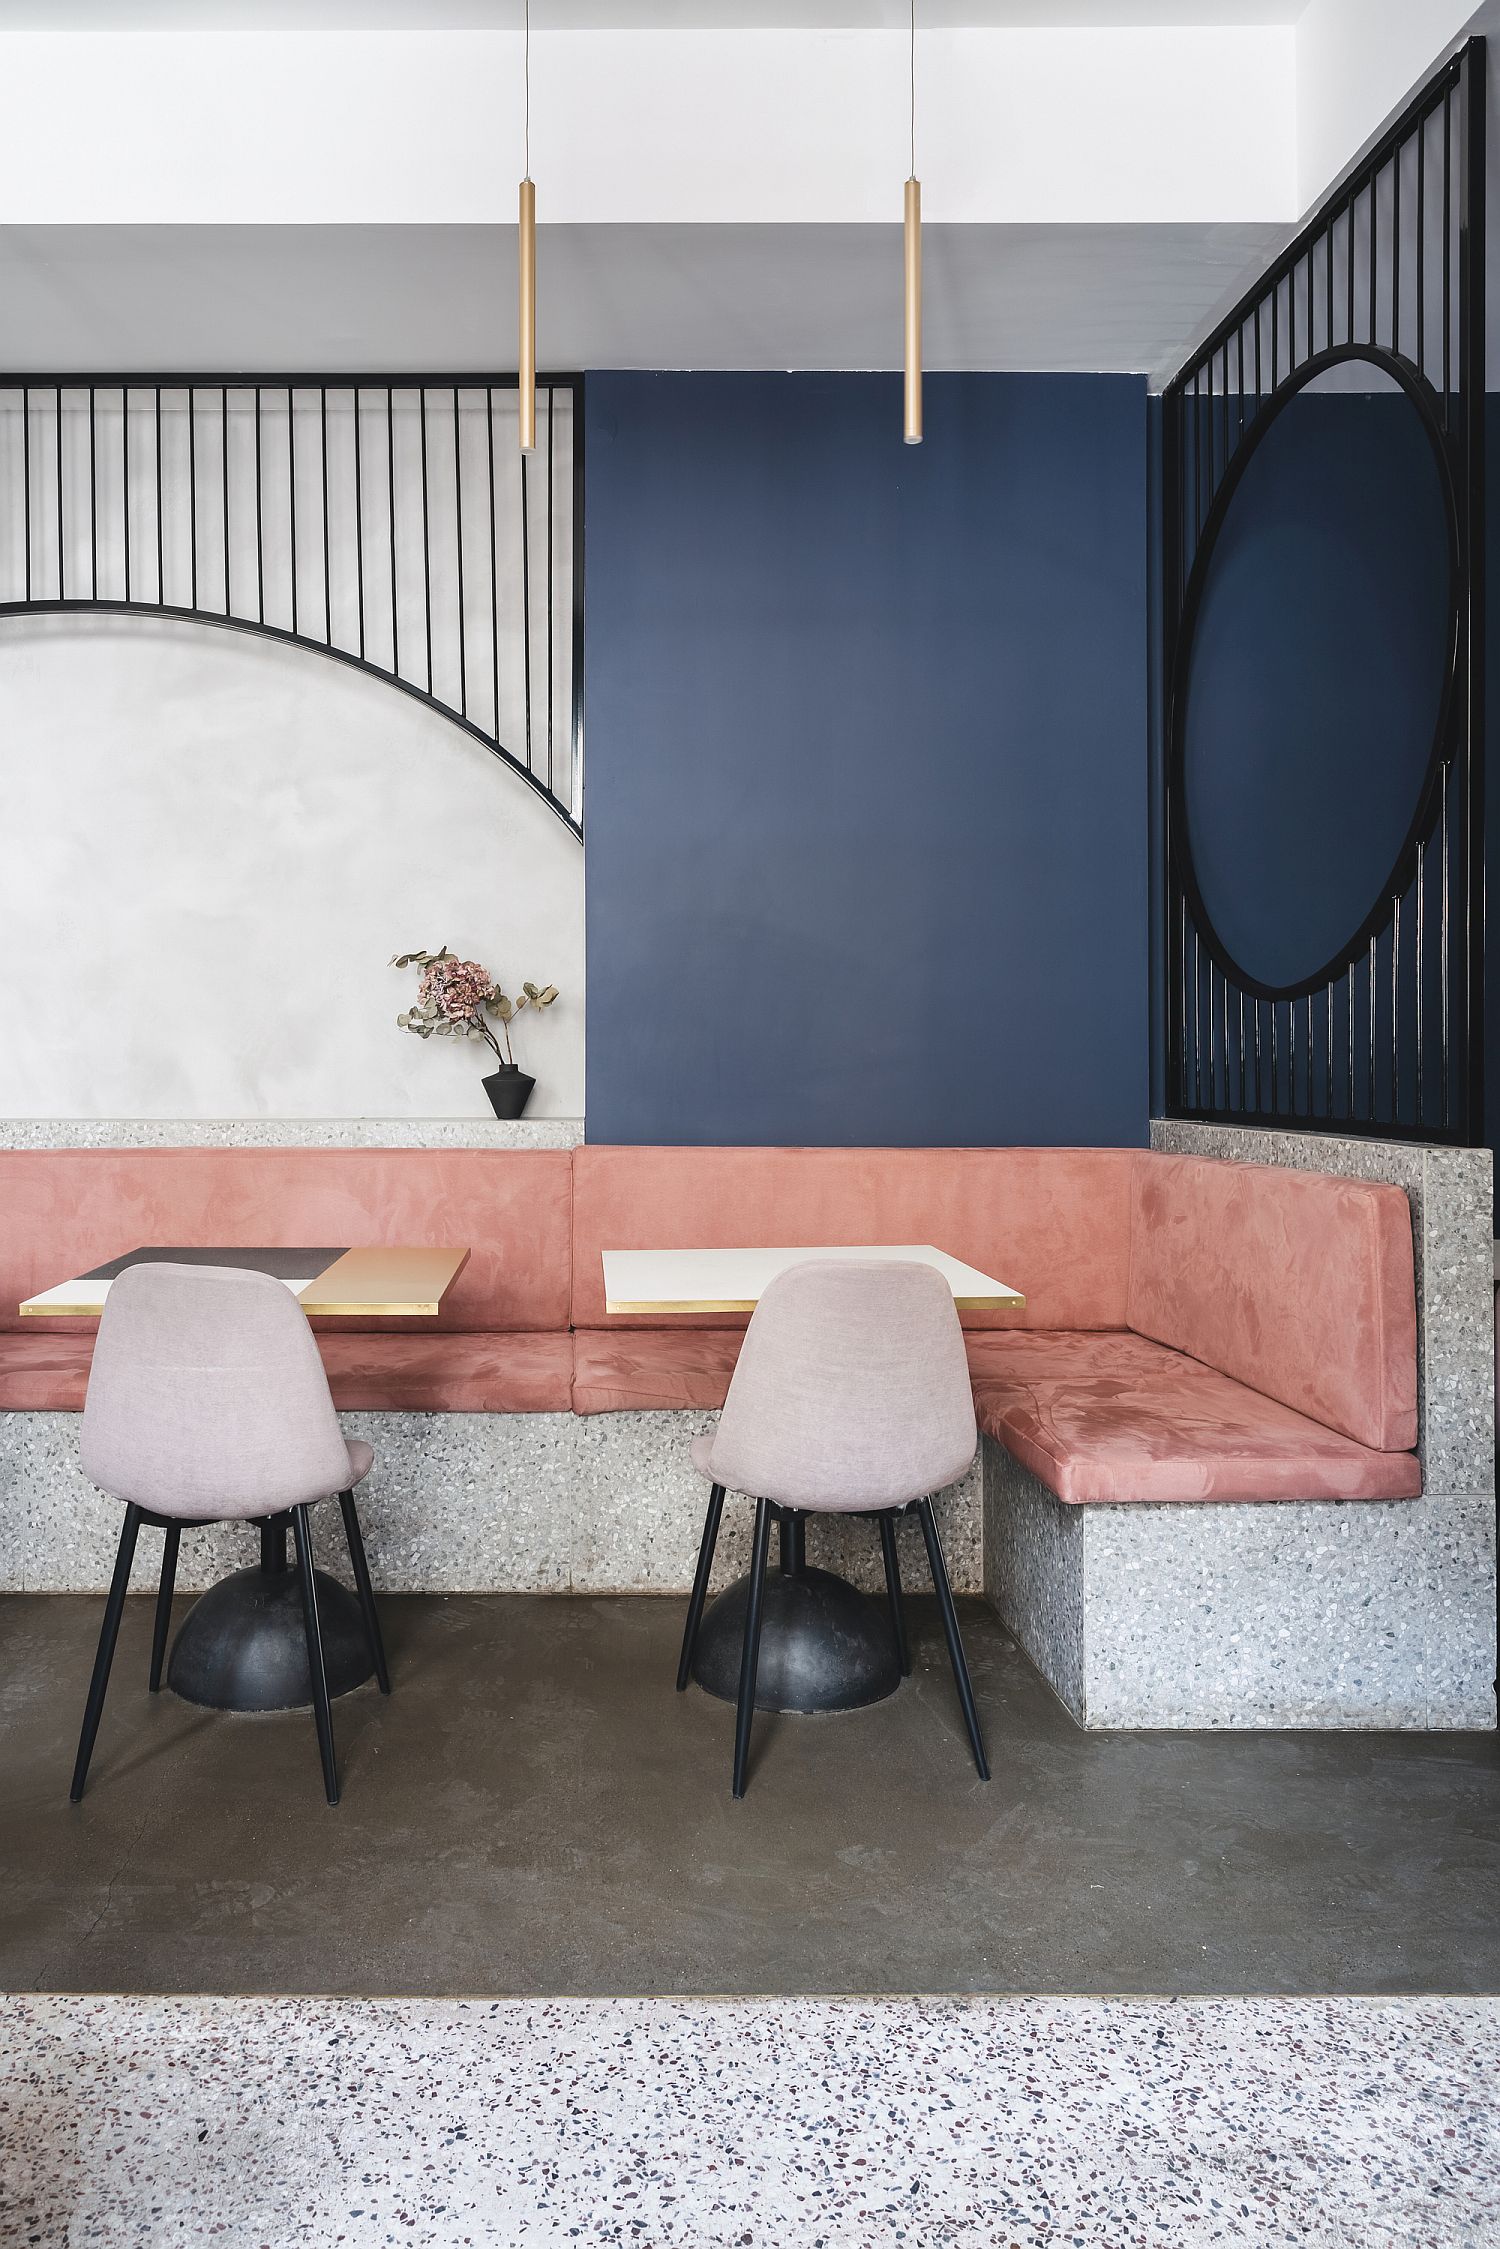 Soft-pastel-pinks-and-blues-are-coupled-with-exposed-concrete-inside-the-apartment